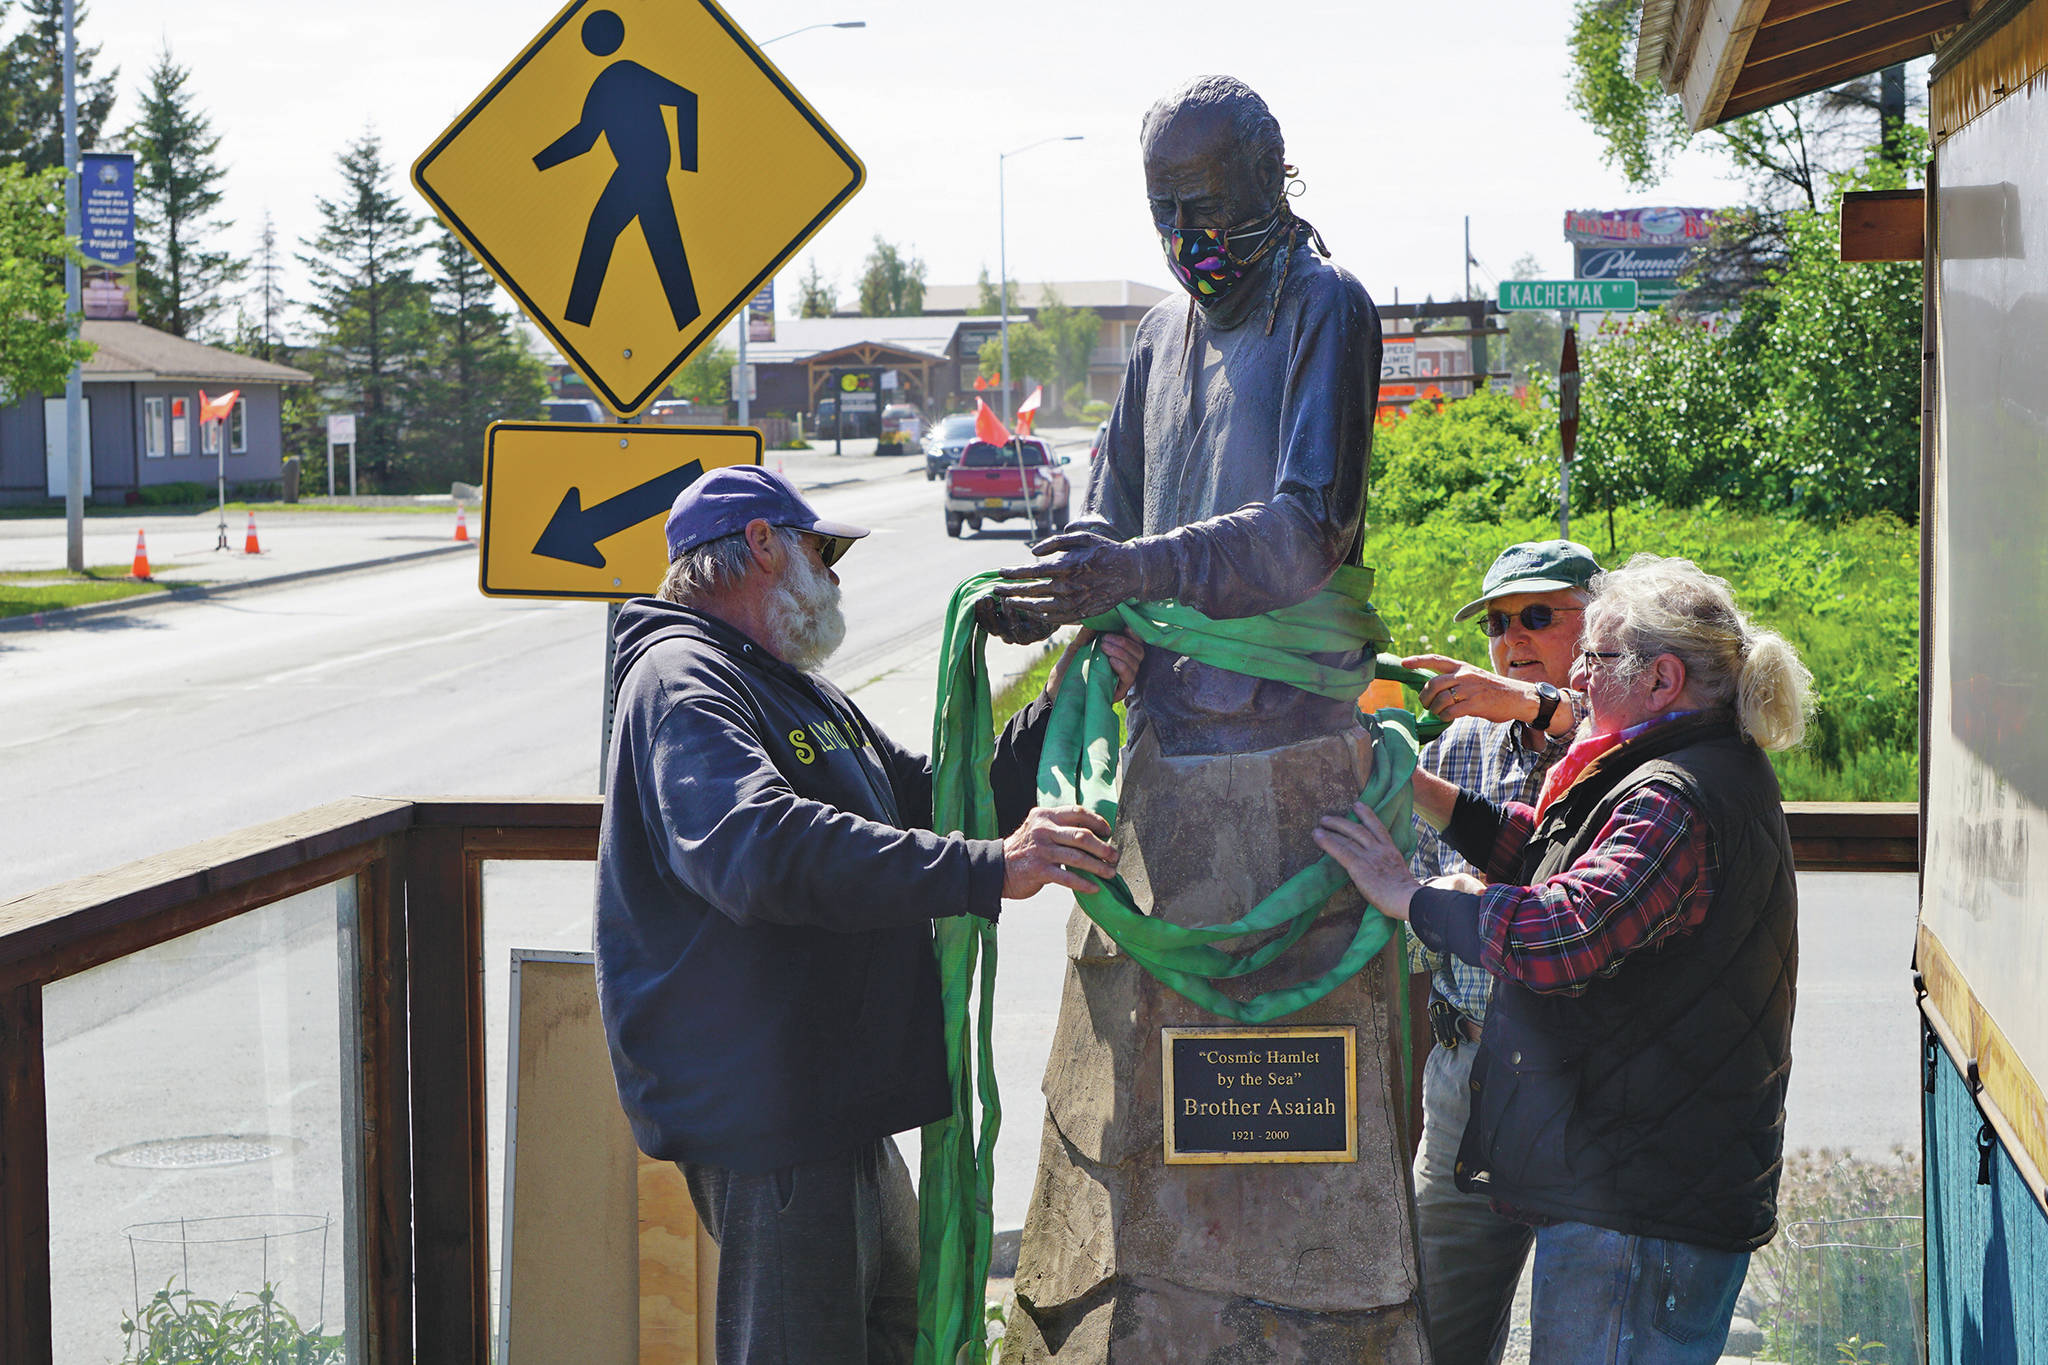 Mike Kennedy, left, Will Files, center, and Leo Vait, right, attach strapes to the Brother Asaiah statue on the deck of Cosmic Kitchen on Saturday, June 6, 2020, in Homer, Alaska. Vait created the statue as a commission by John Nazarian, a friend of Asaiah Bates. Nazarian had loaned to the Pioneer Avenue restaurant the statue of the man who coined the phrase “Cosmic Hamlet by the Sea” to describe Homer. The statue was moved after Cosmic Kitchen owners Michelle Wilson and Sean Hogan sold their restaurant. Cosmic Kitchen closed on Saturday. The Asaiah statue will be stored until a new location can be found. (Photo by Michael Armstrong/Homer News)